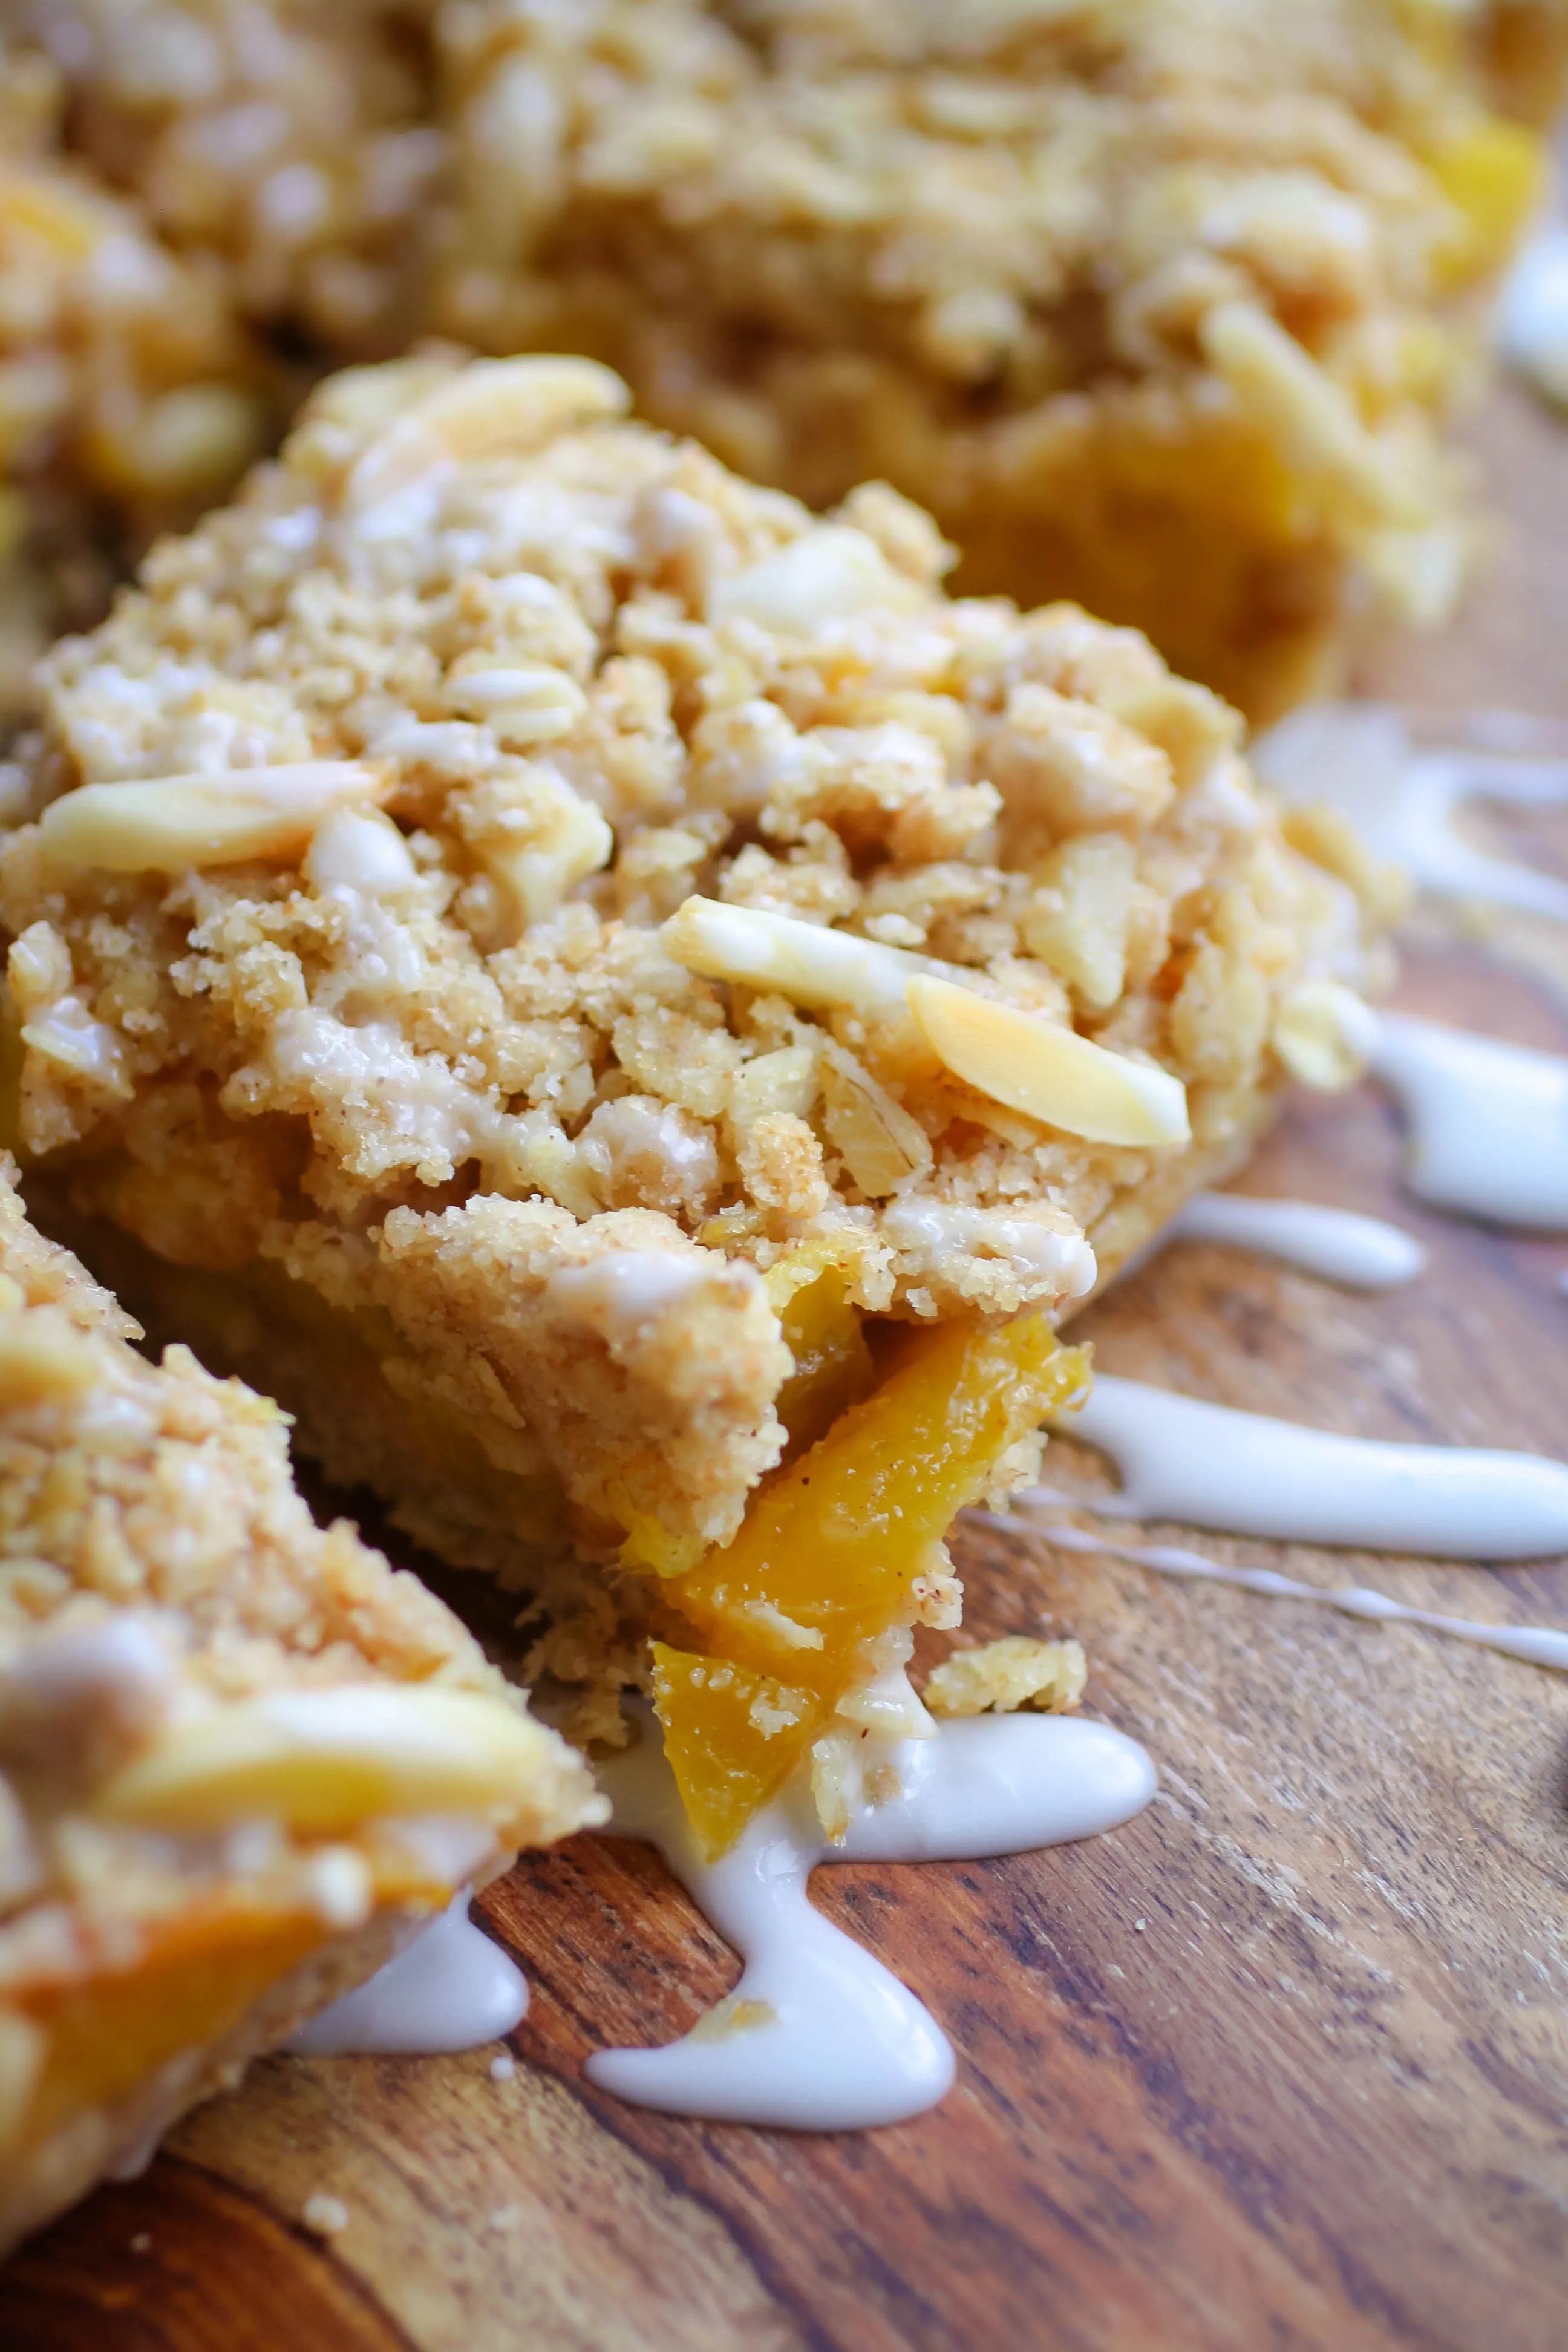 Peach Crumble Squares with Bourbon Glaze for the sweet-treat win! You'll enjoy these Peach Crumble Squares with Bourbon Glaze this season!